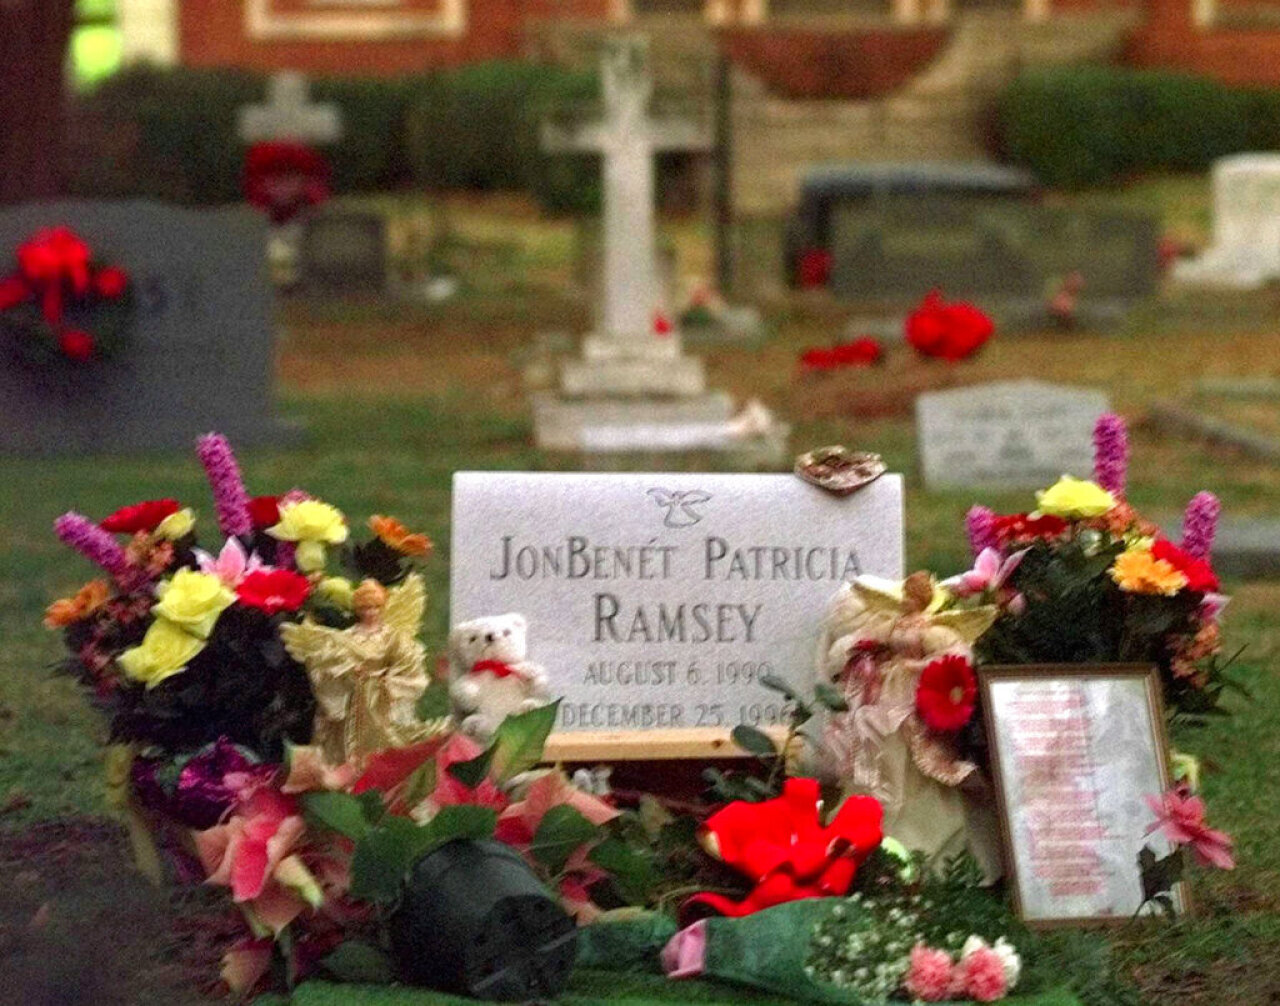 [IMAGE] Could new DNA tests solve JonBenet Ramsey murder? Family asks for evidence